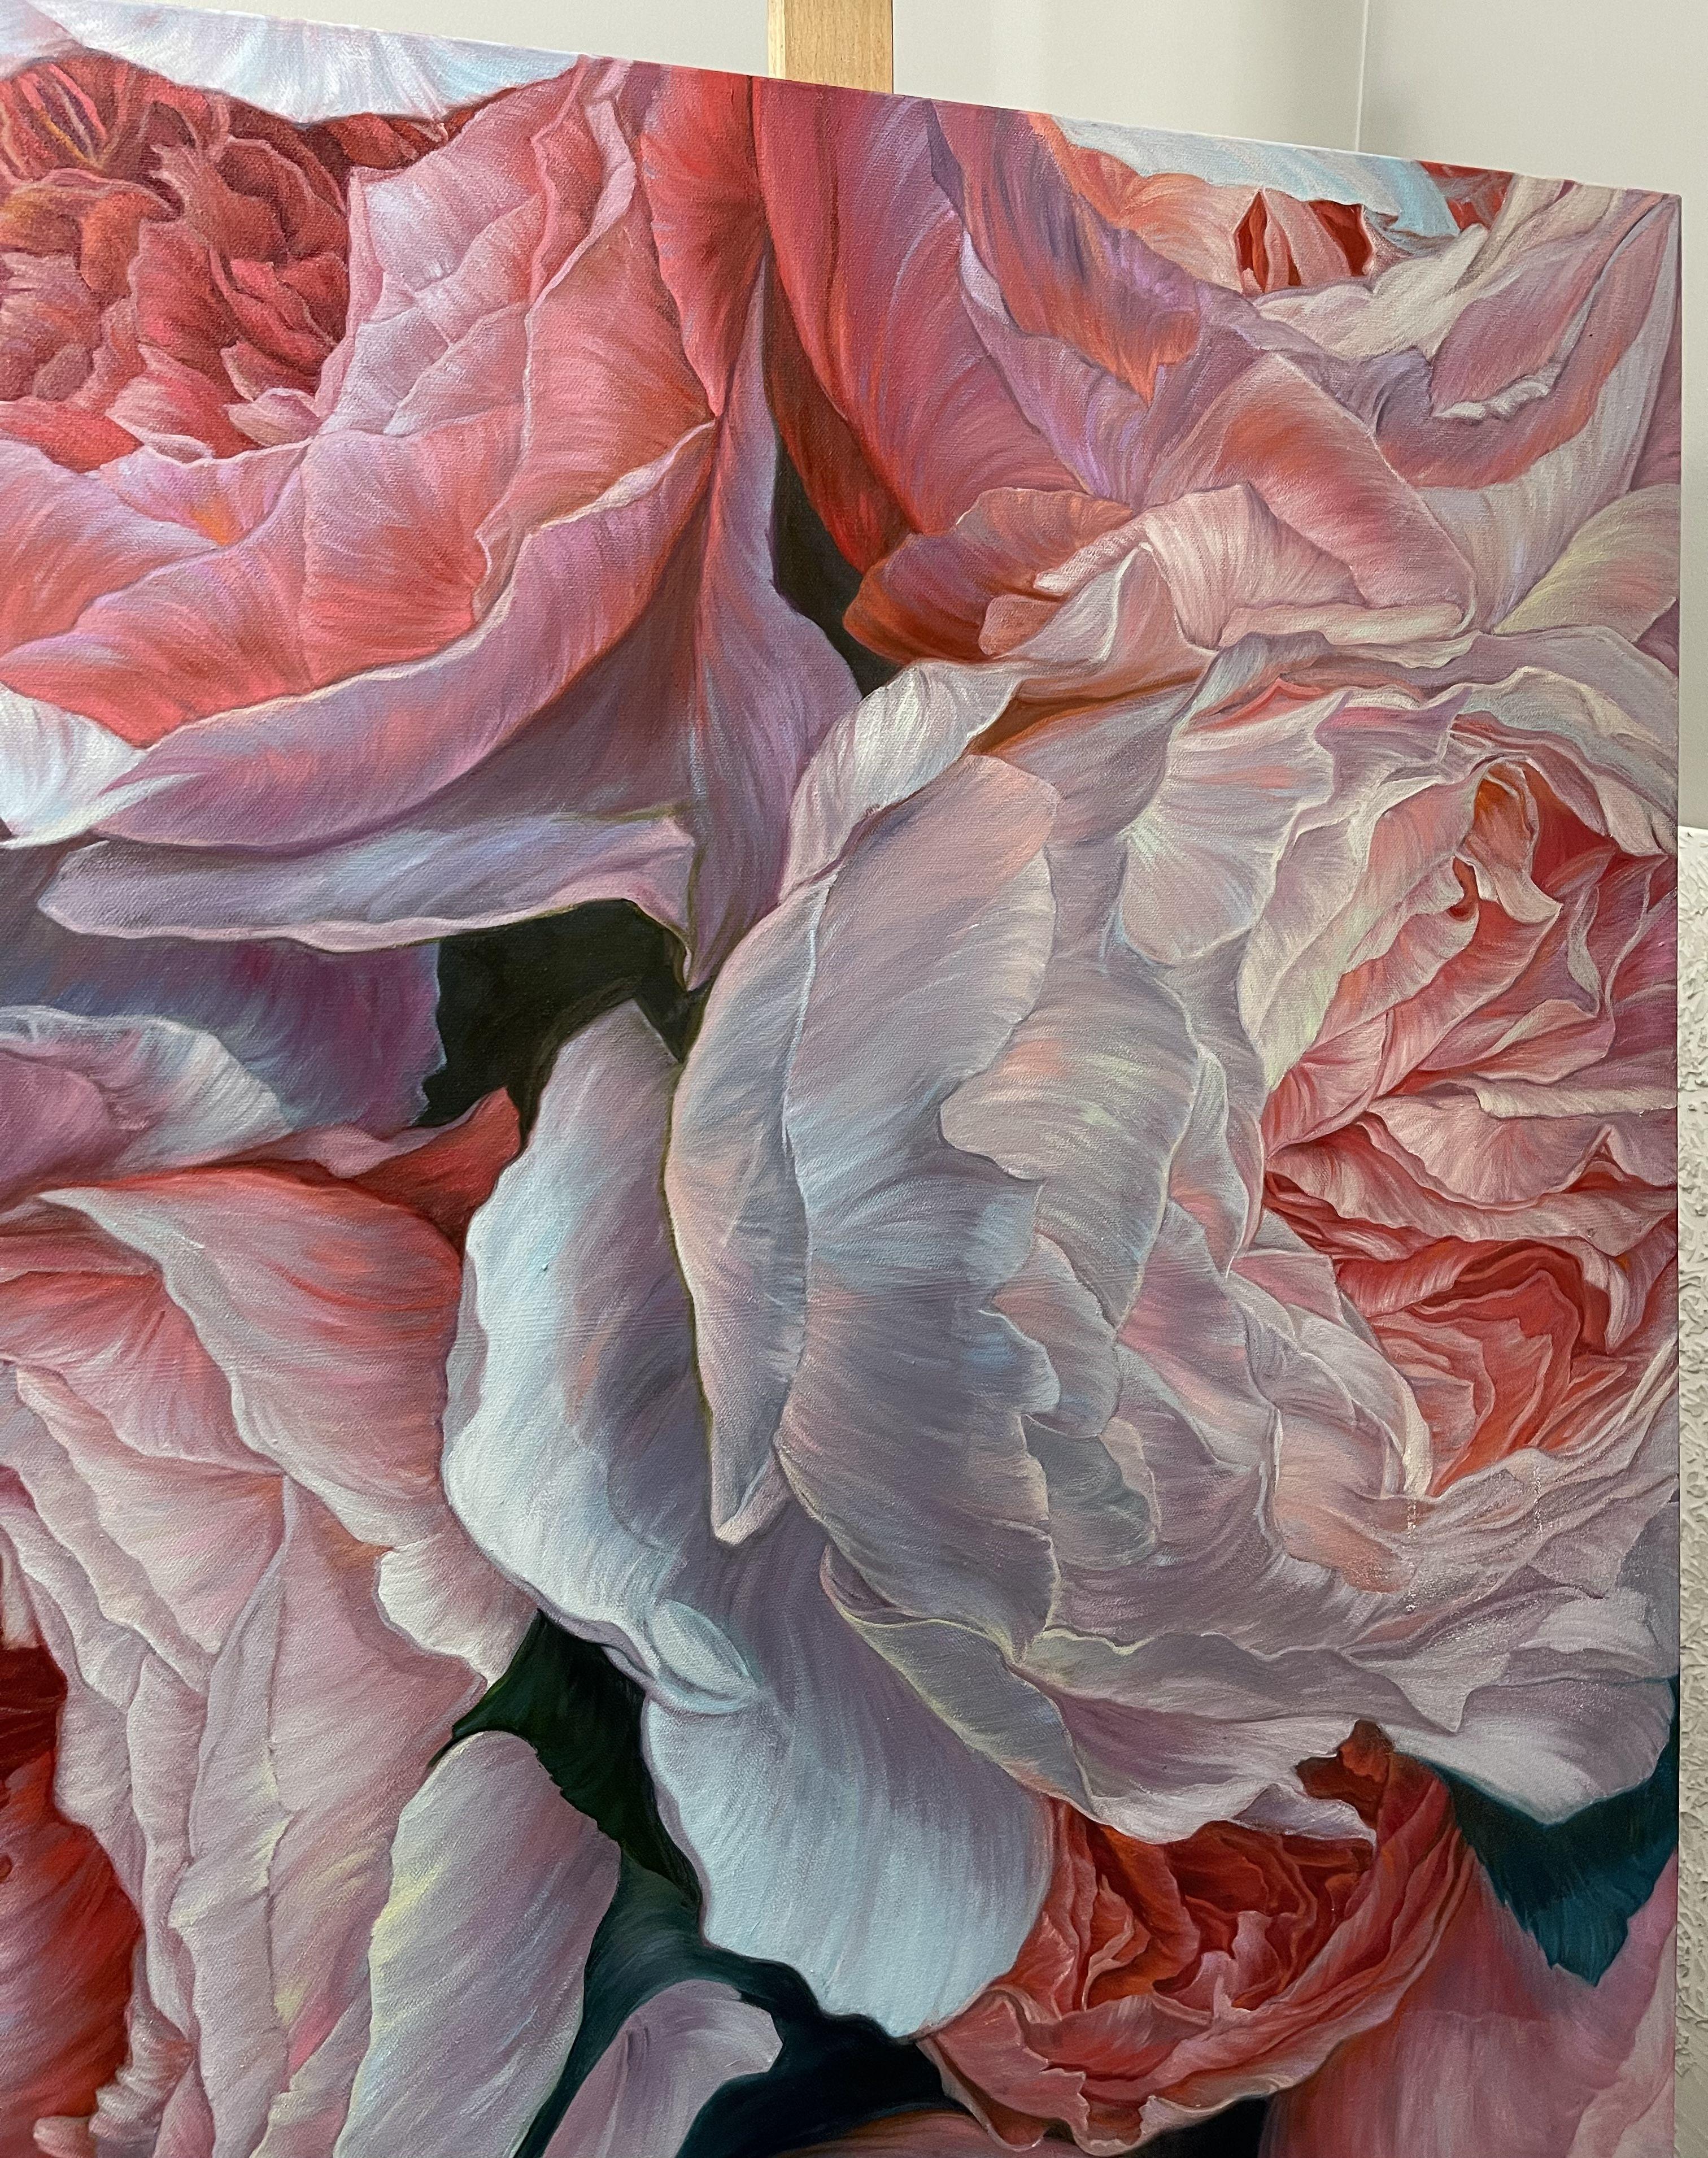 Peony roses, 2022 year  :: Painting :: Fine Art :: This piece comes with an official certificate of authenticity signed by the artist :: Ready to Hang: Yes :: Signed: Yes :: Signature Location: Elena Podmarkova  :: Canvas :: Diagonal :: Original ::